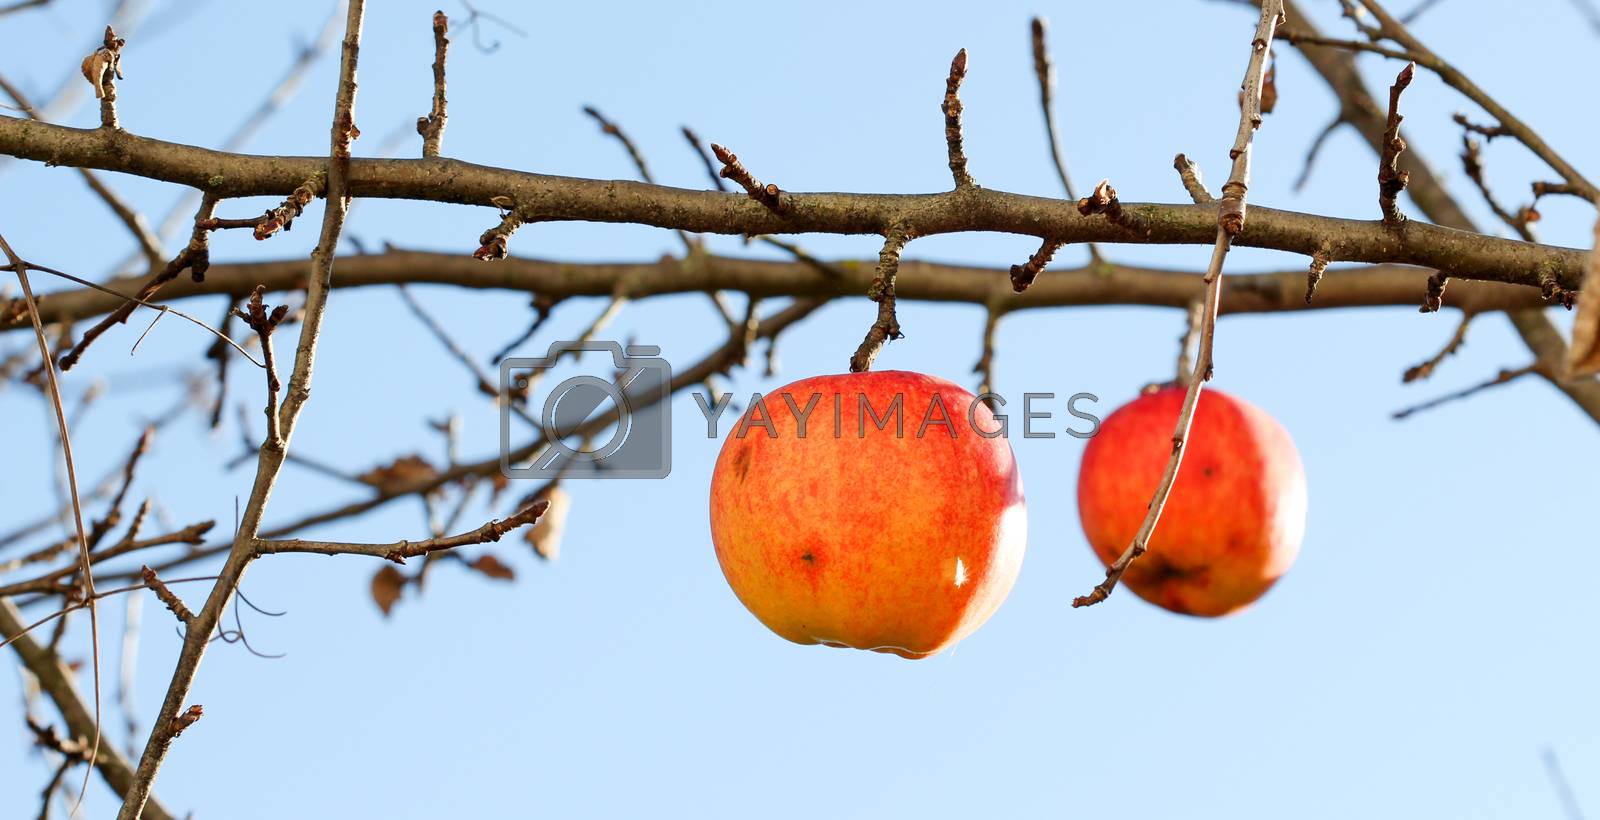 Royalty free image of Apples on tree on november morning by nehru